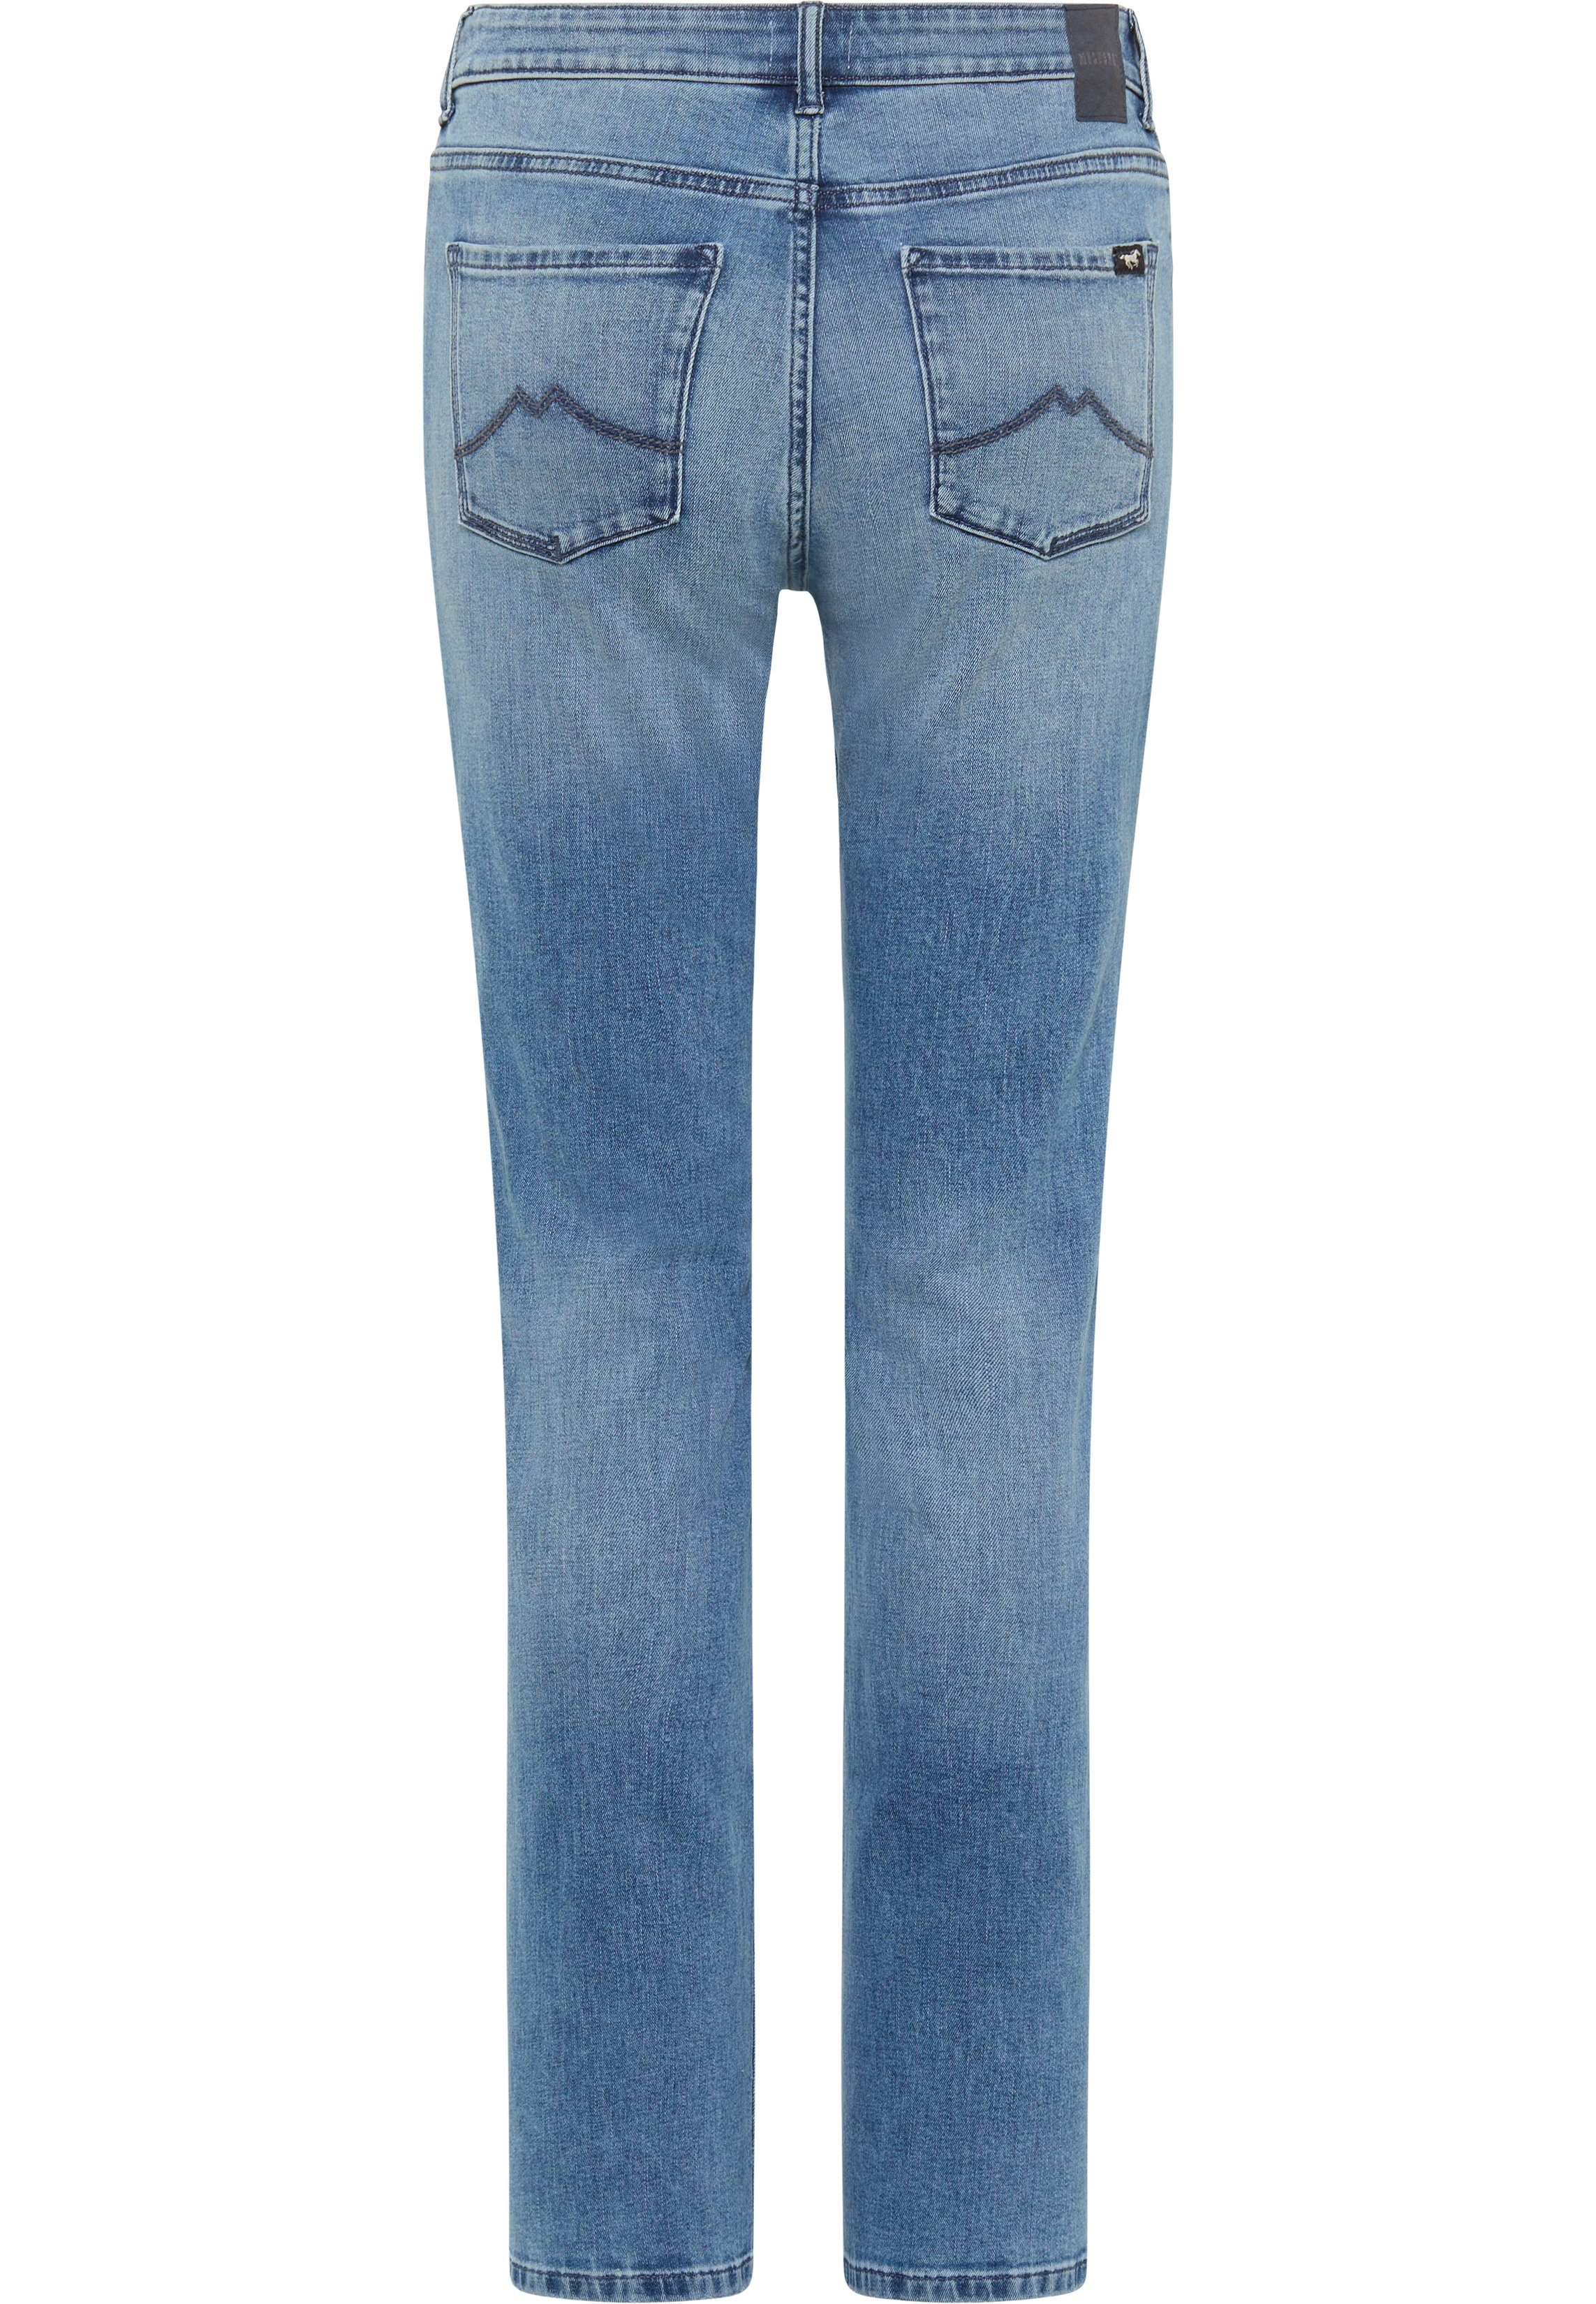 Straight Style Crosby mittelblau-5000412 Straight-Jeans MUSTANG Relaxed